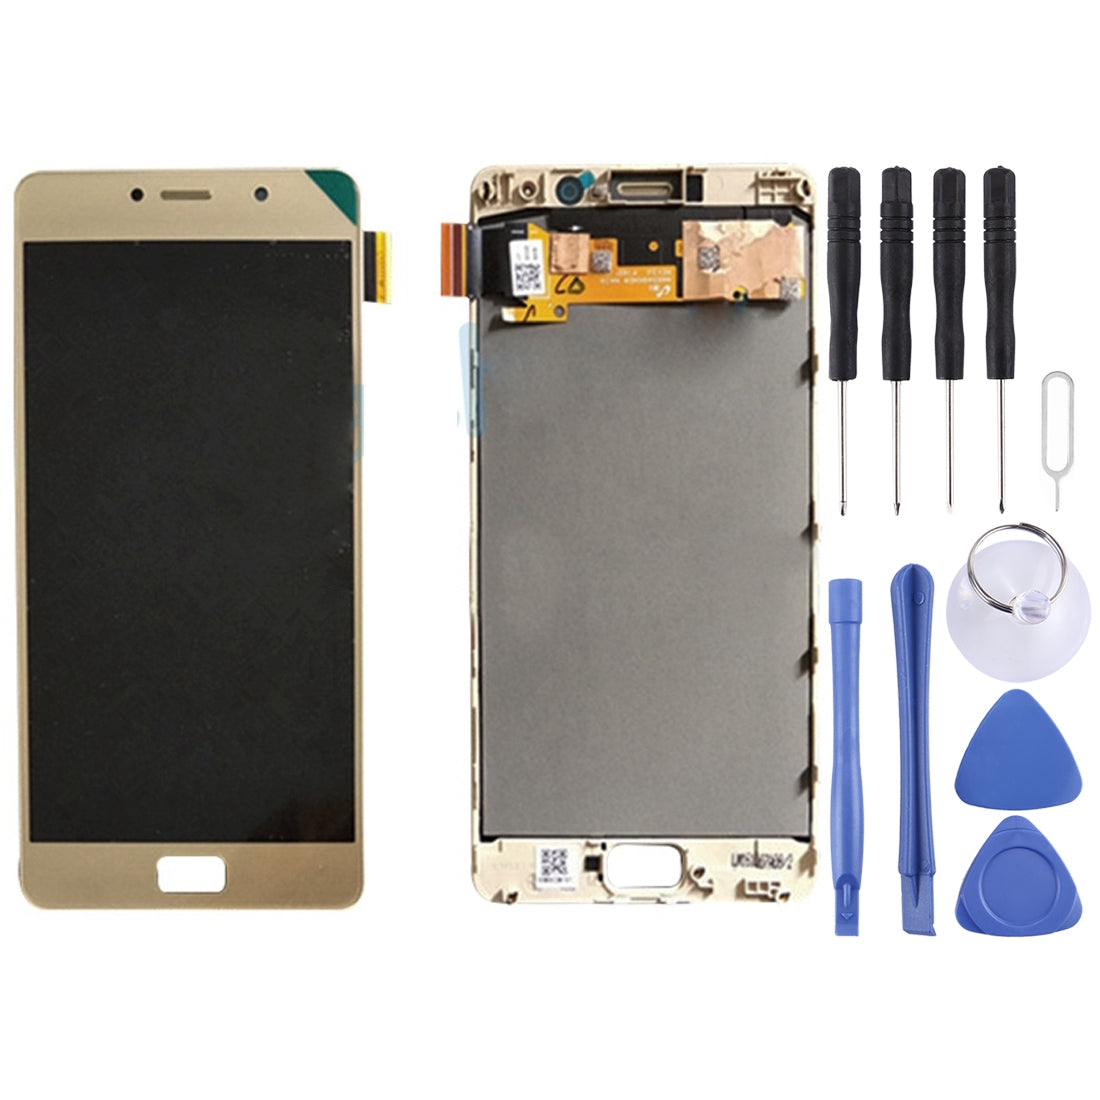 Full Screen LCD + Touch + Frame Lenovo Vibe P2 P2a42 P2c72 Gold